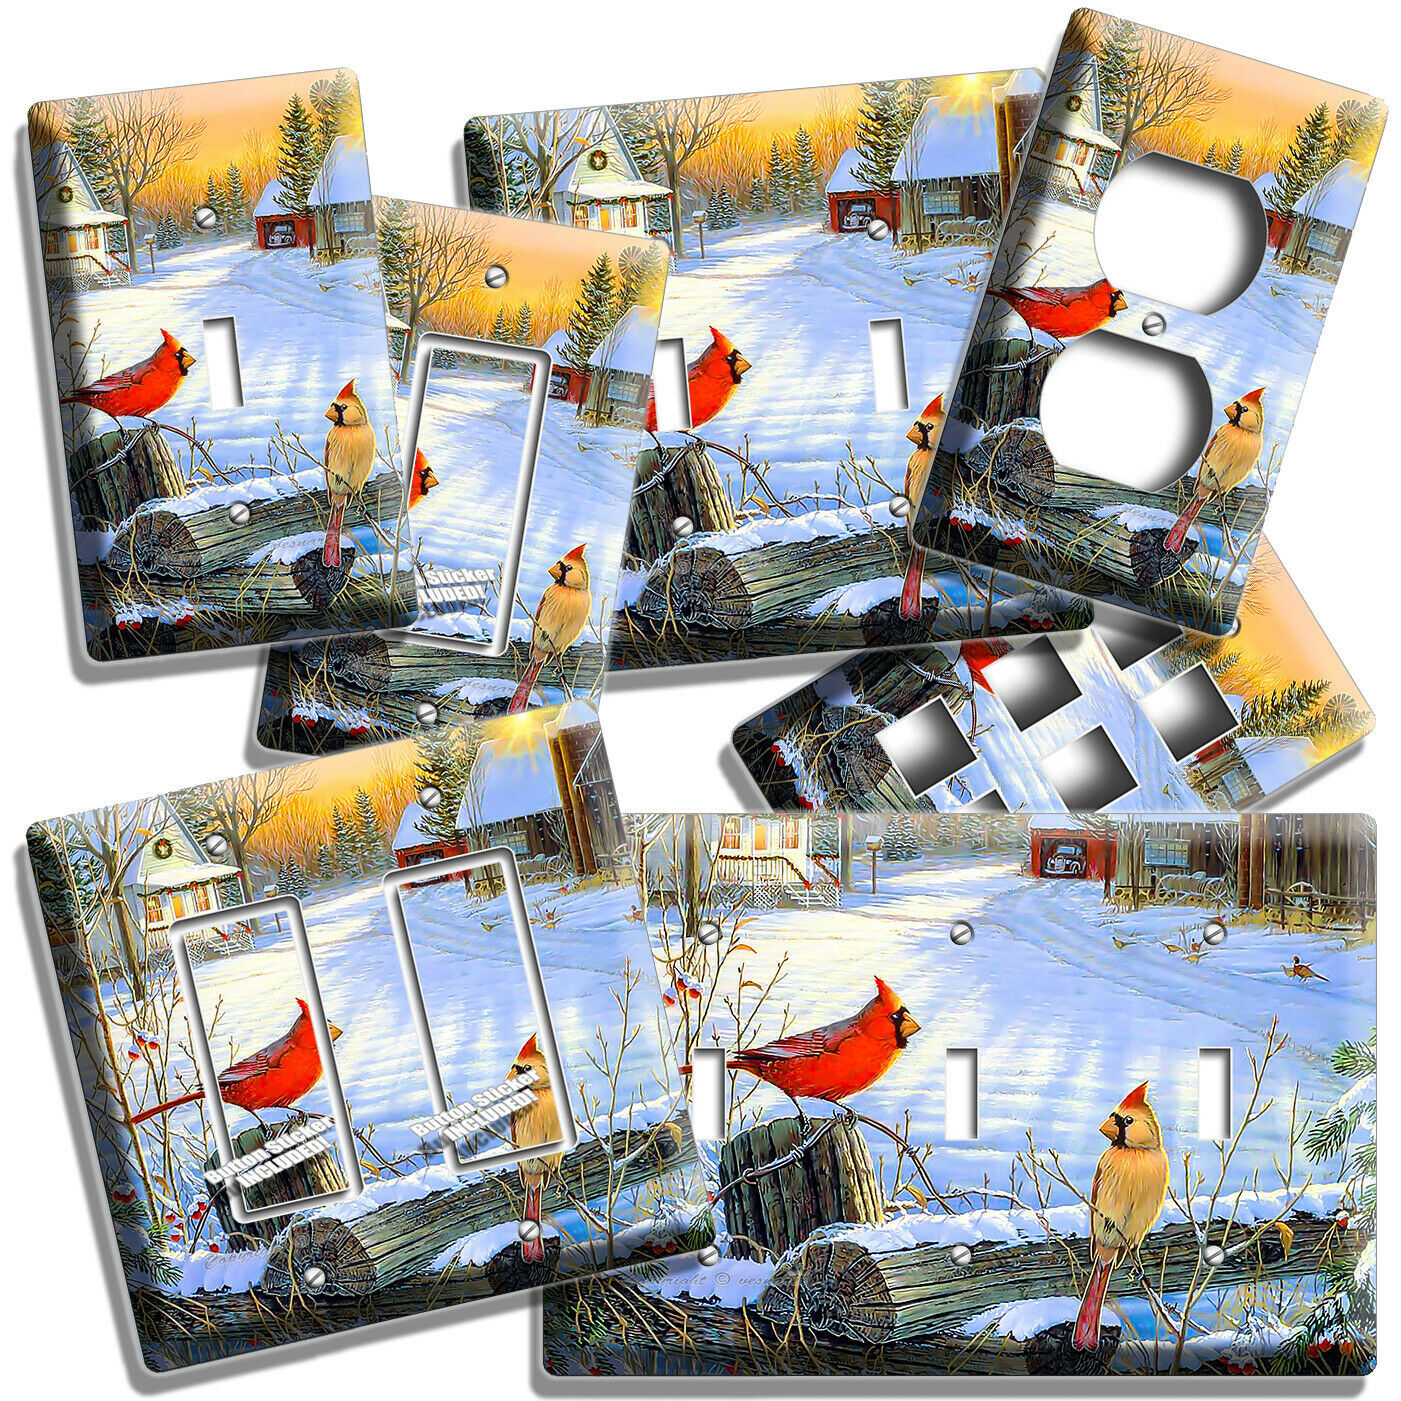 CARDINAL BIRDS CONTRY WINTER MORNING LIGHT SWITCH OUTLET WALL PLATES ROOM DECOR - $16.73 - $26.96